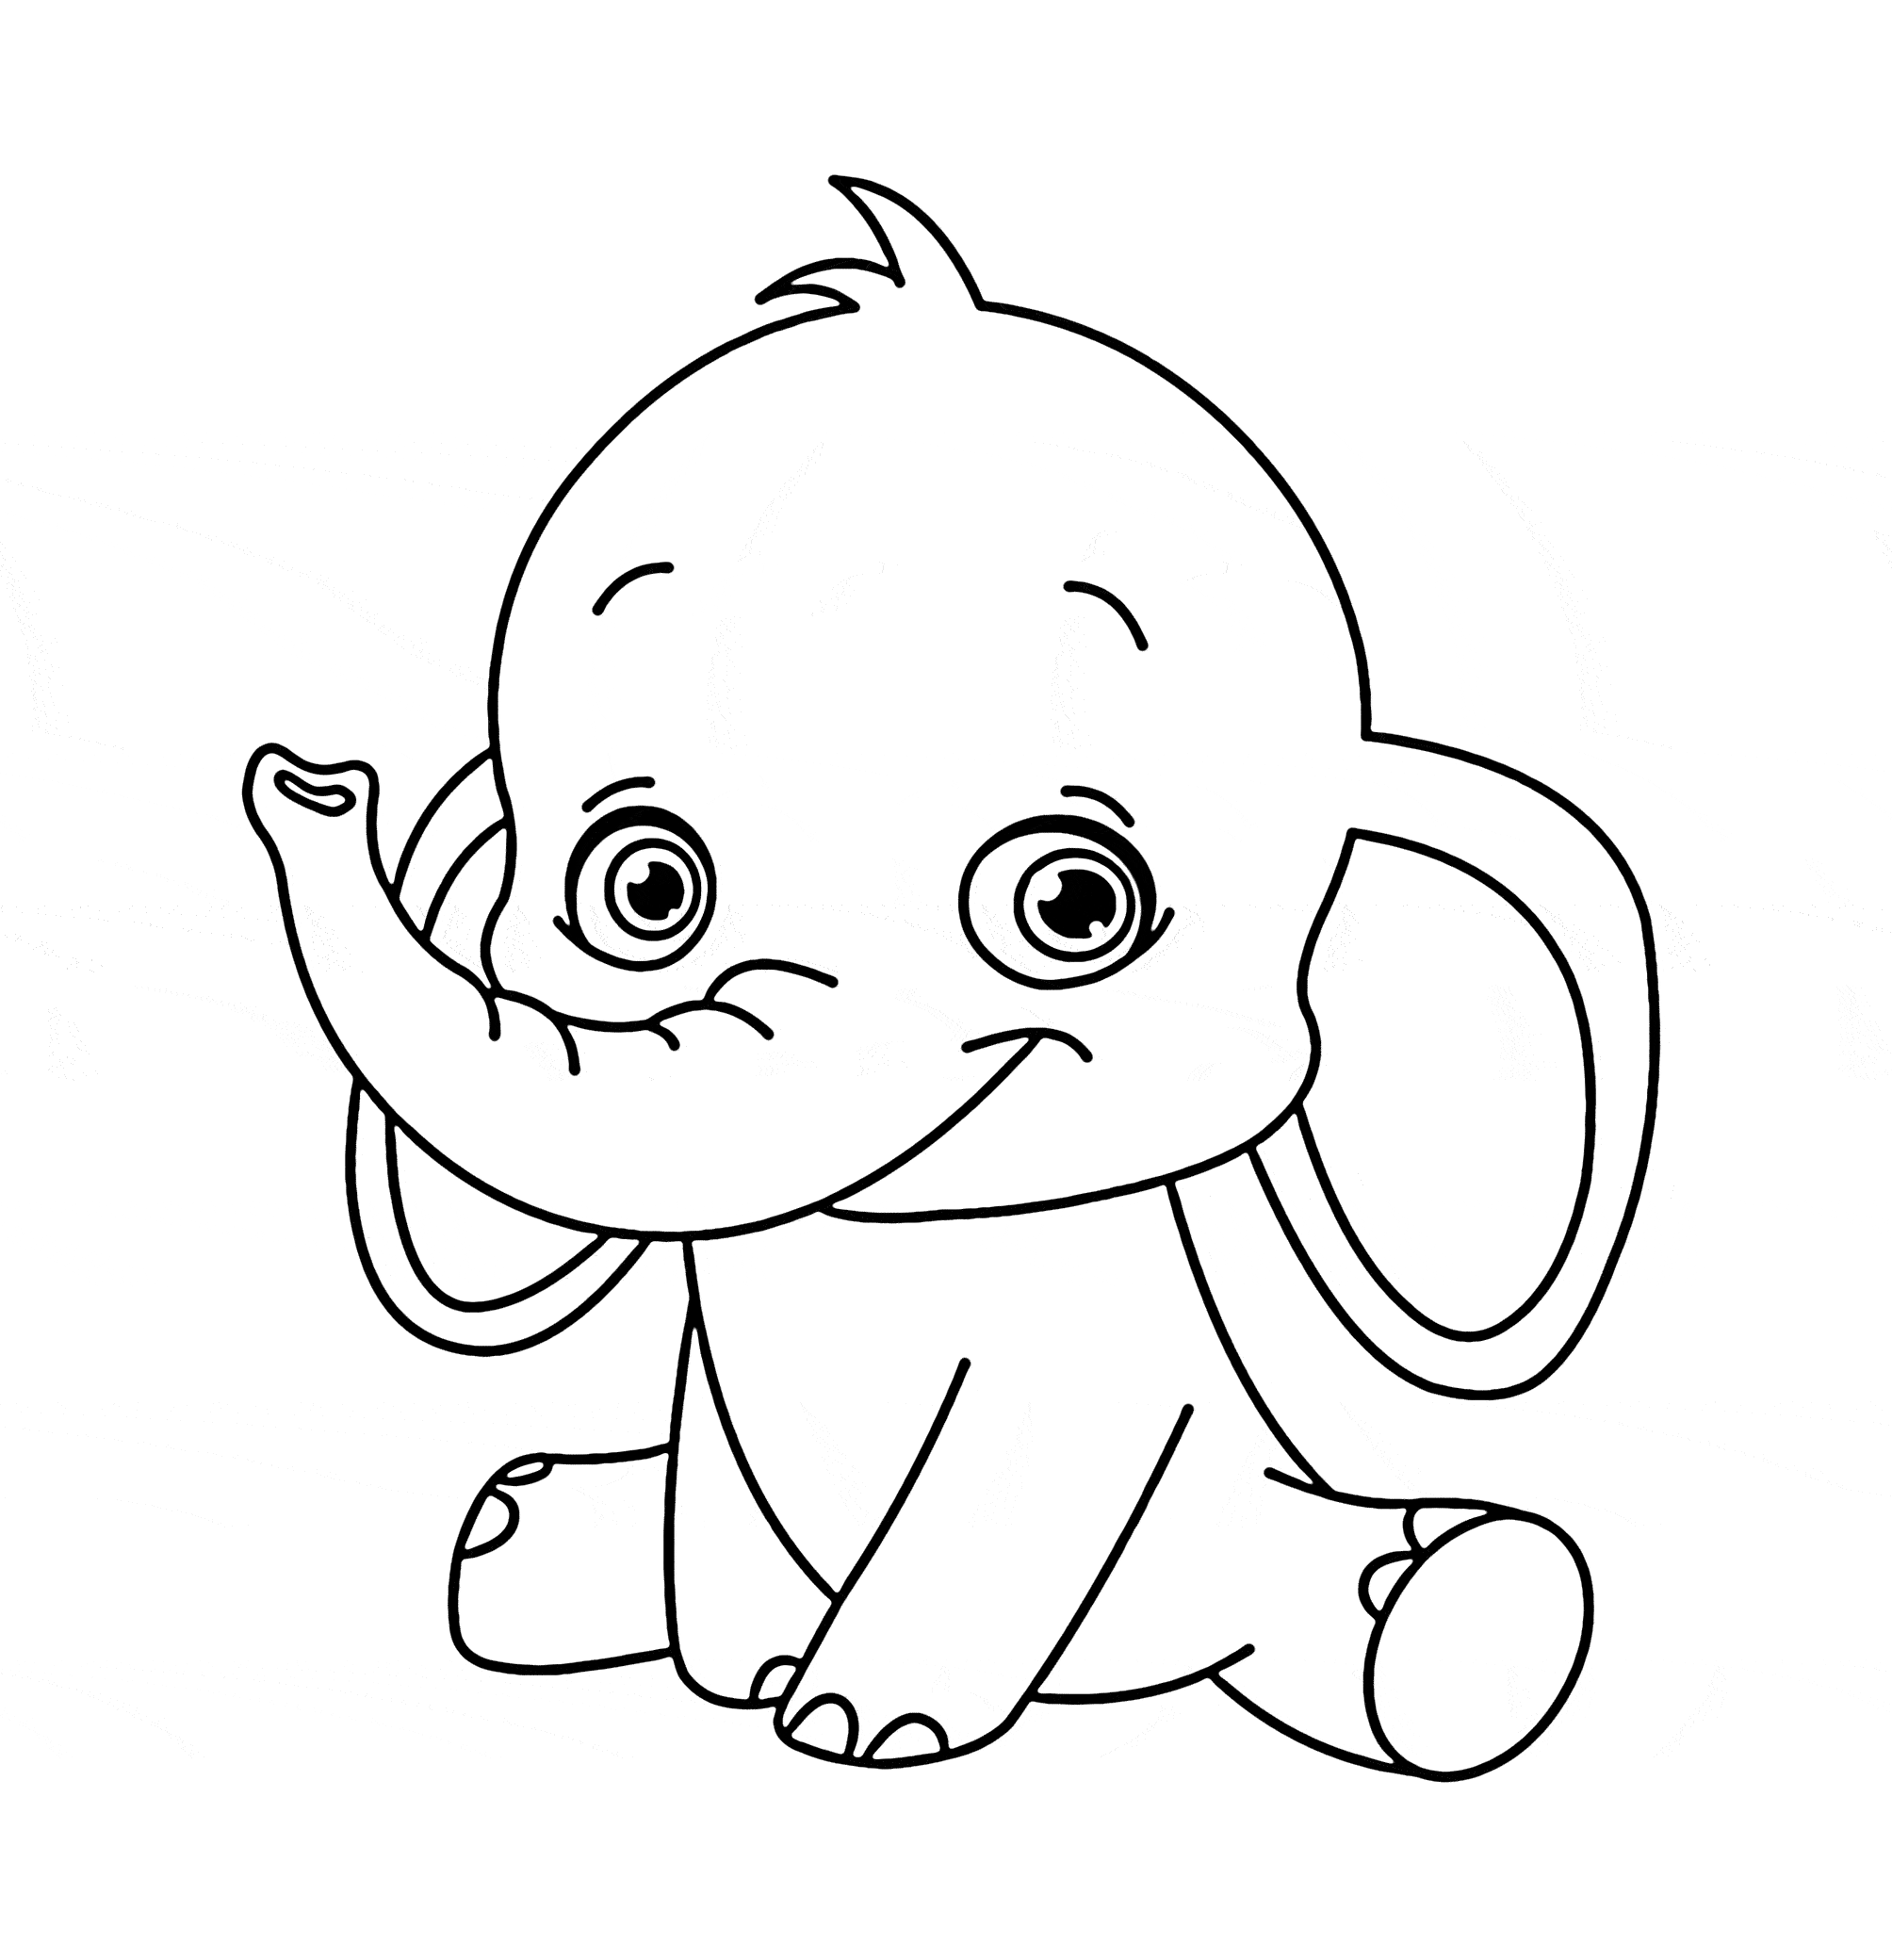 Baby Elephant Coloring Pages For Kids